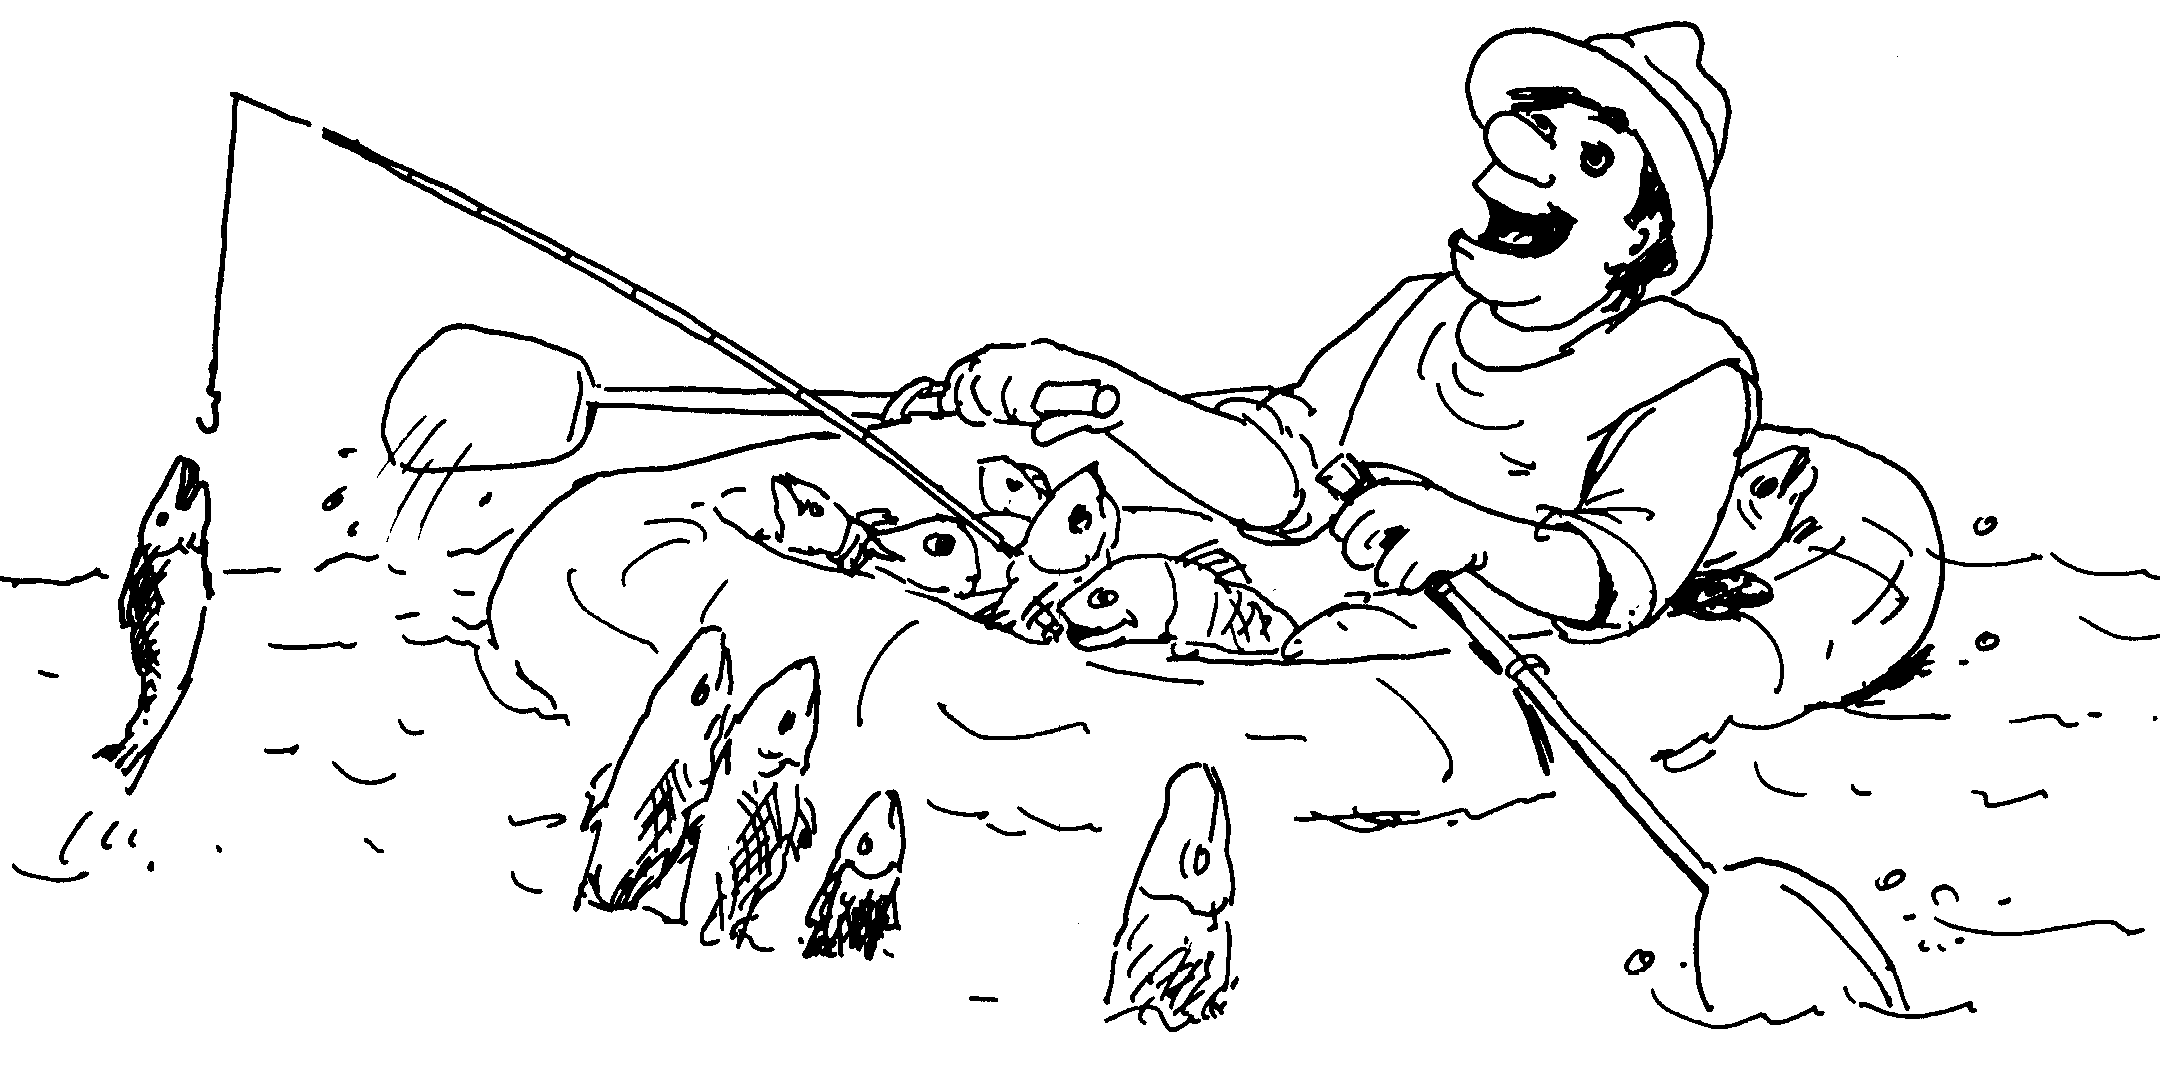 Outdoor Recreation Coloring Pages - Coloring Home